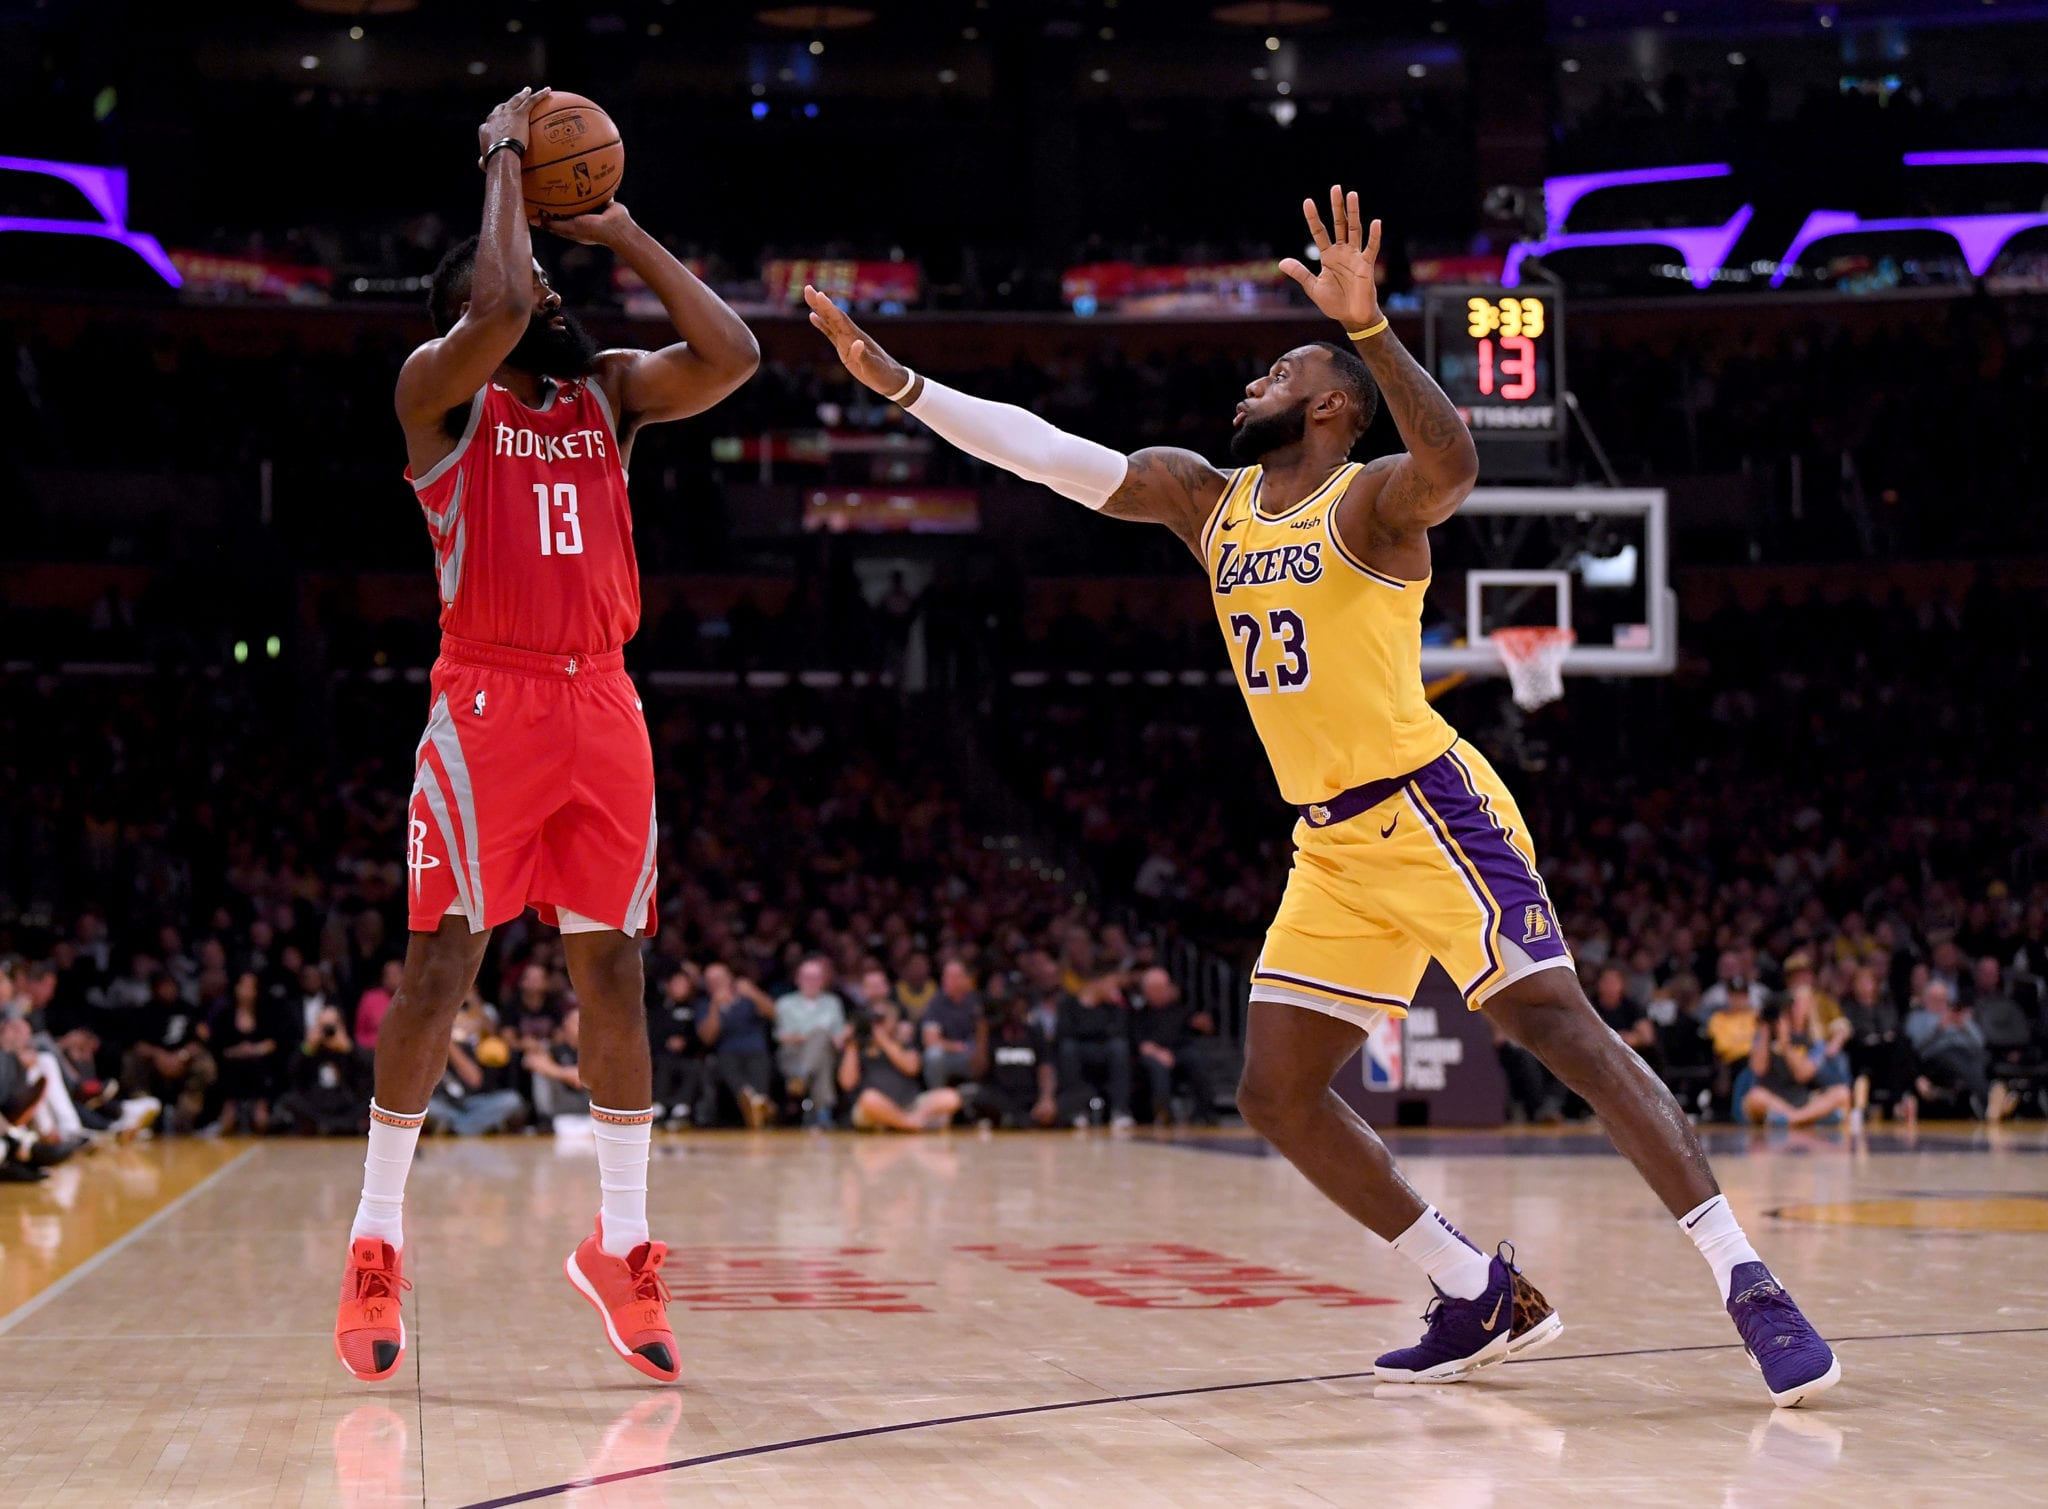 Lakers vs Rockets playoffs TV schedule